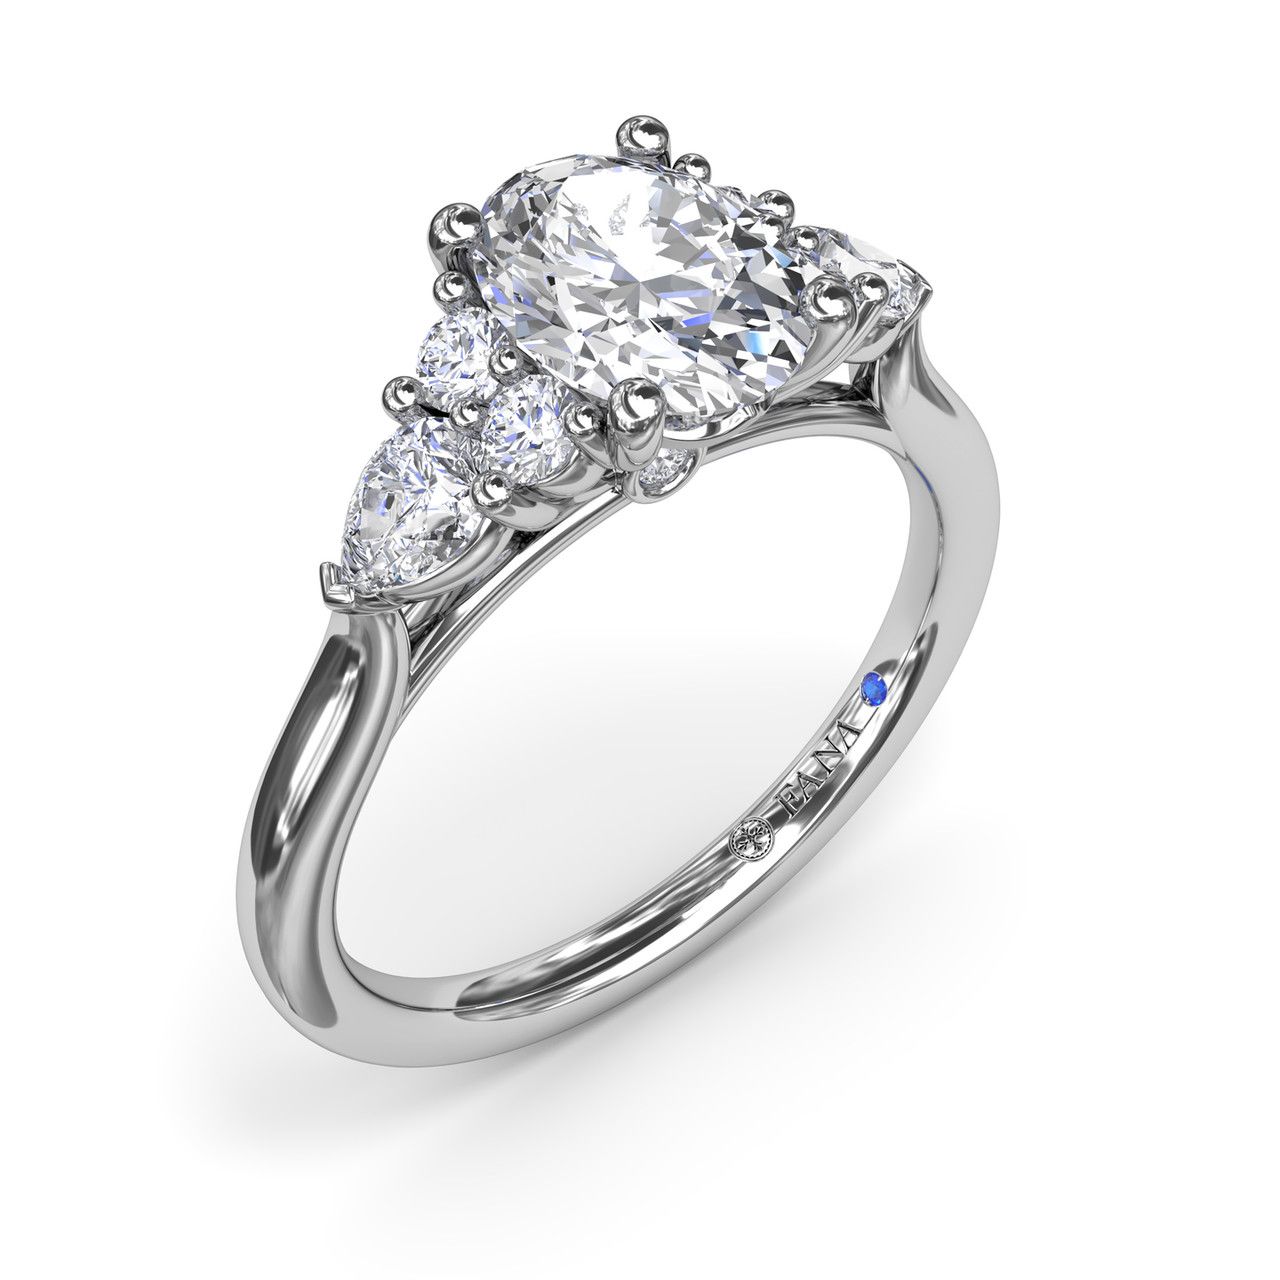 14K WHITE GOLD SEMI-MOUNT RING SIZE 6.5 WITH 8=0.42TW VARIOUS SHAPES (2 PEARS & 6 ROUNDS)  G-H VS2-SI1 DIAMONDS AND ONE ROUND BLUE SAPPHIRE   (3.41 GRAMS)